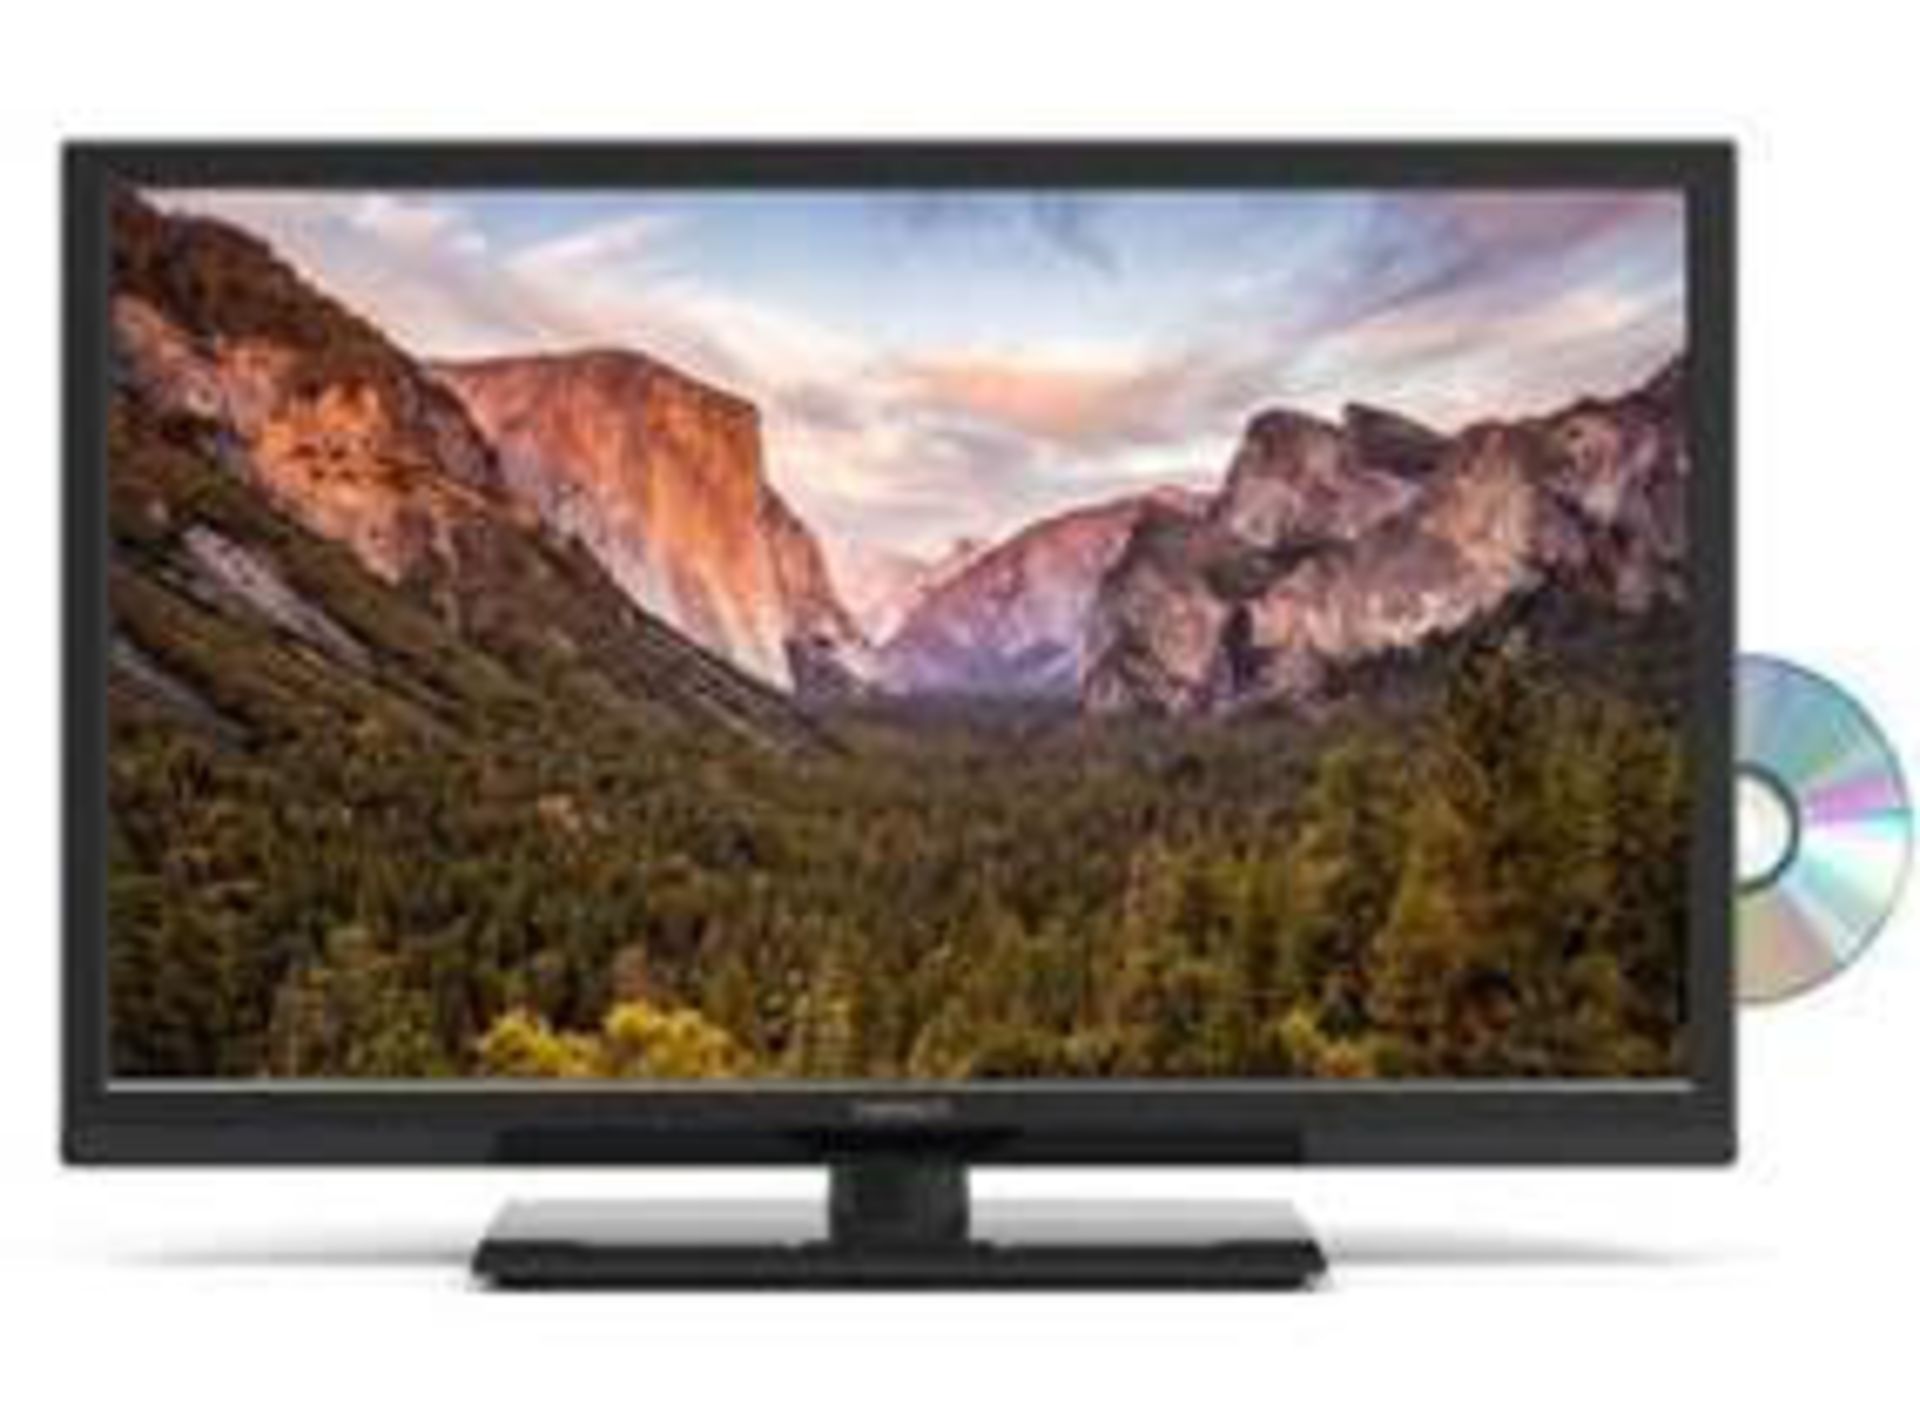 V *TRADE QTY* Brand New Veltech 24" LED Full HD 1080p TV - Built in DVD Player - Built in Freeview X